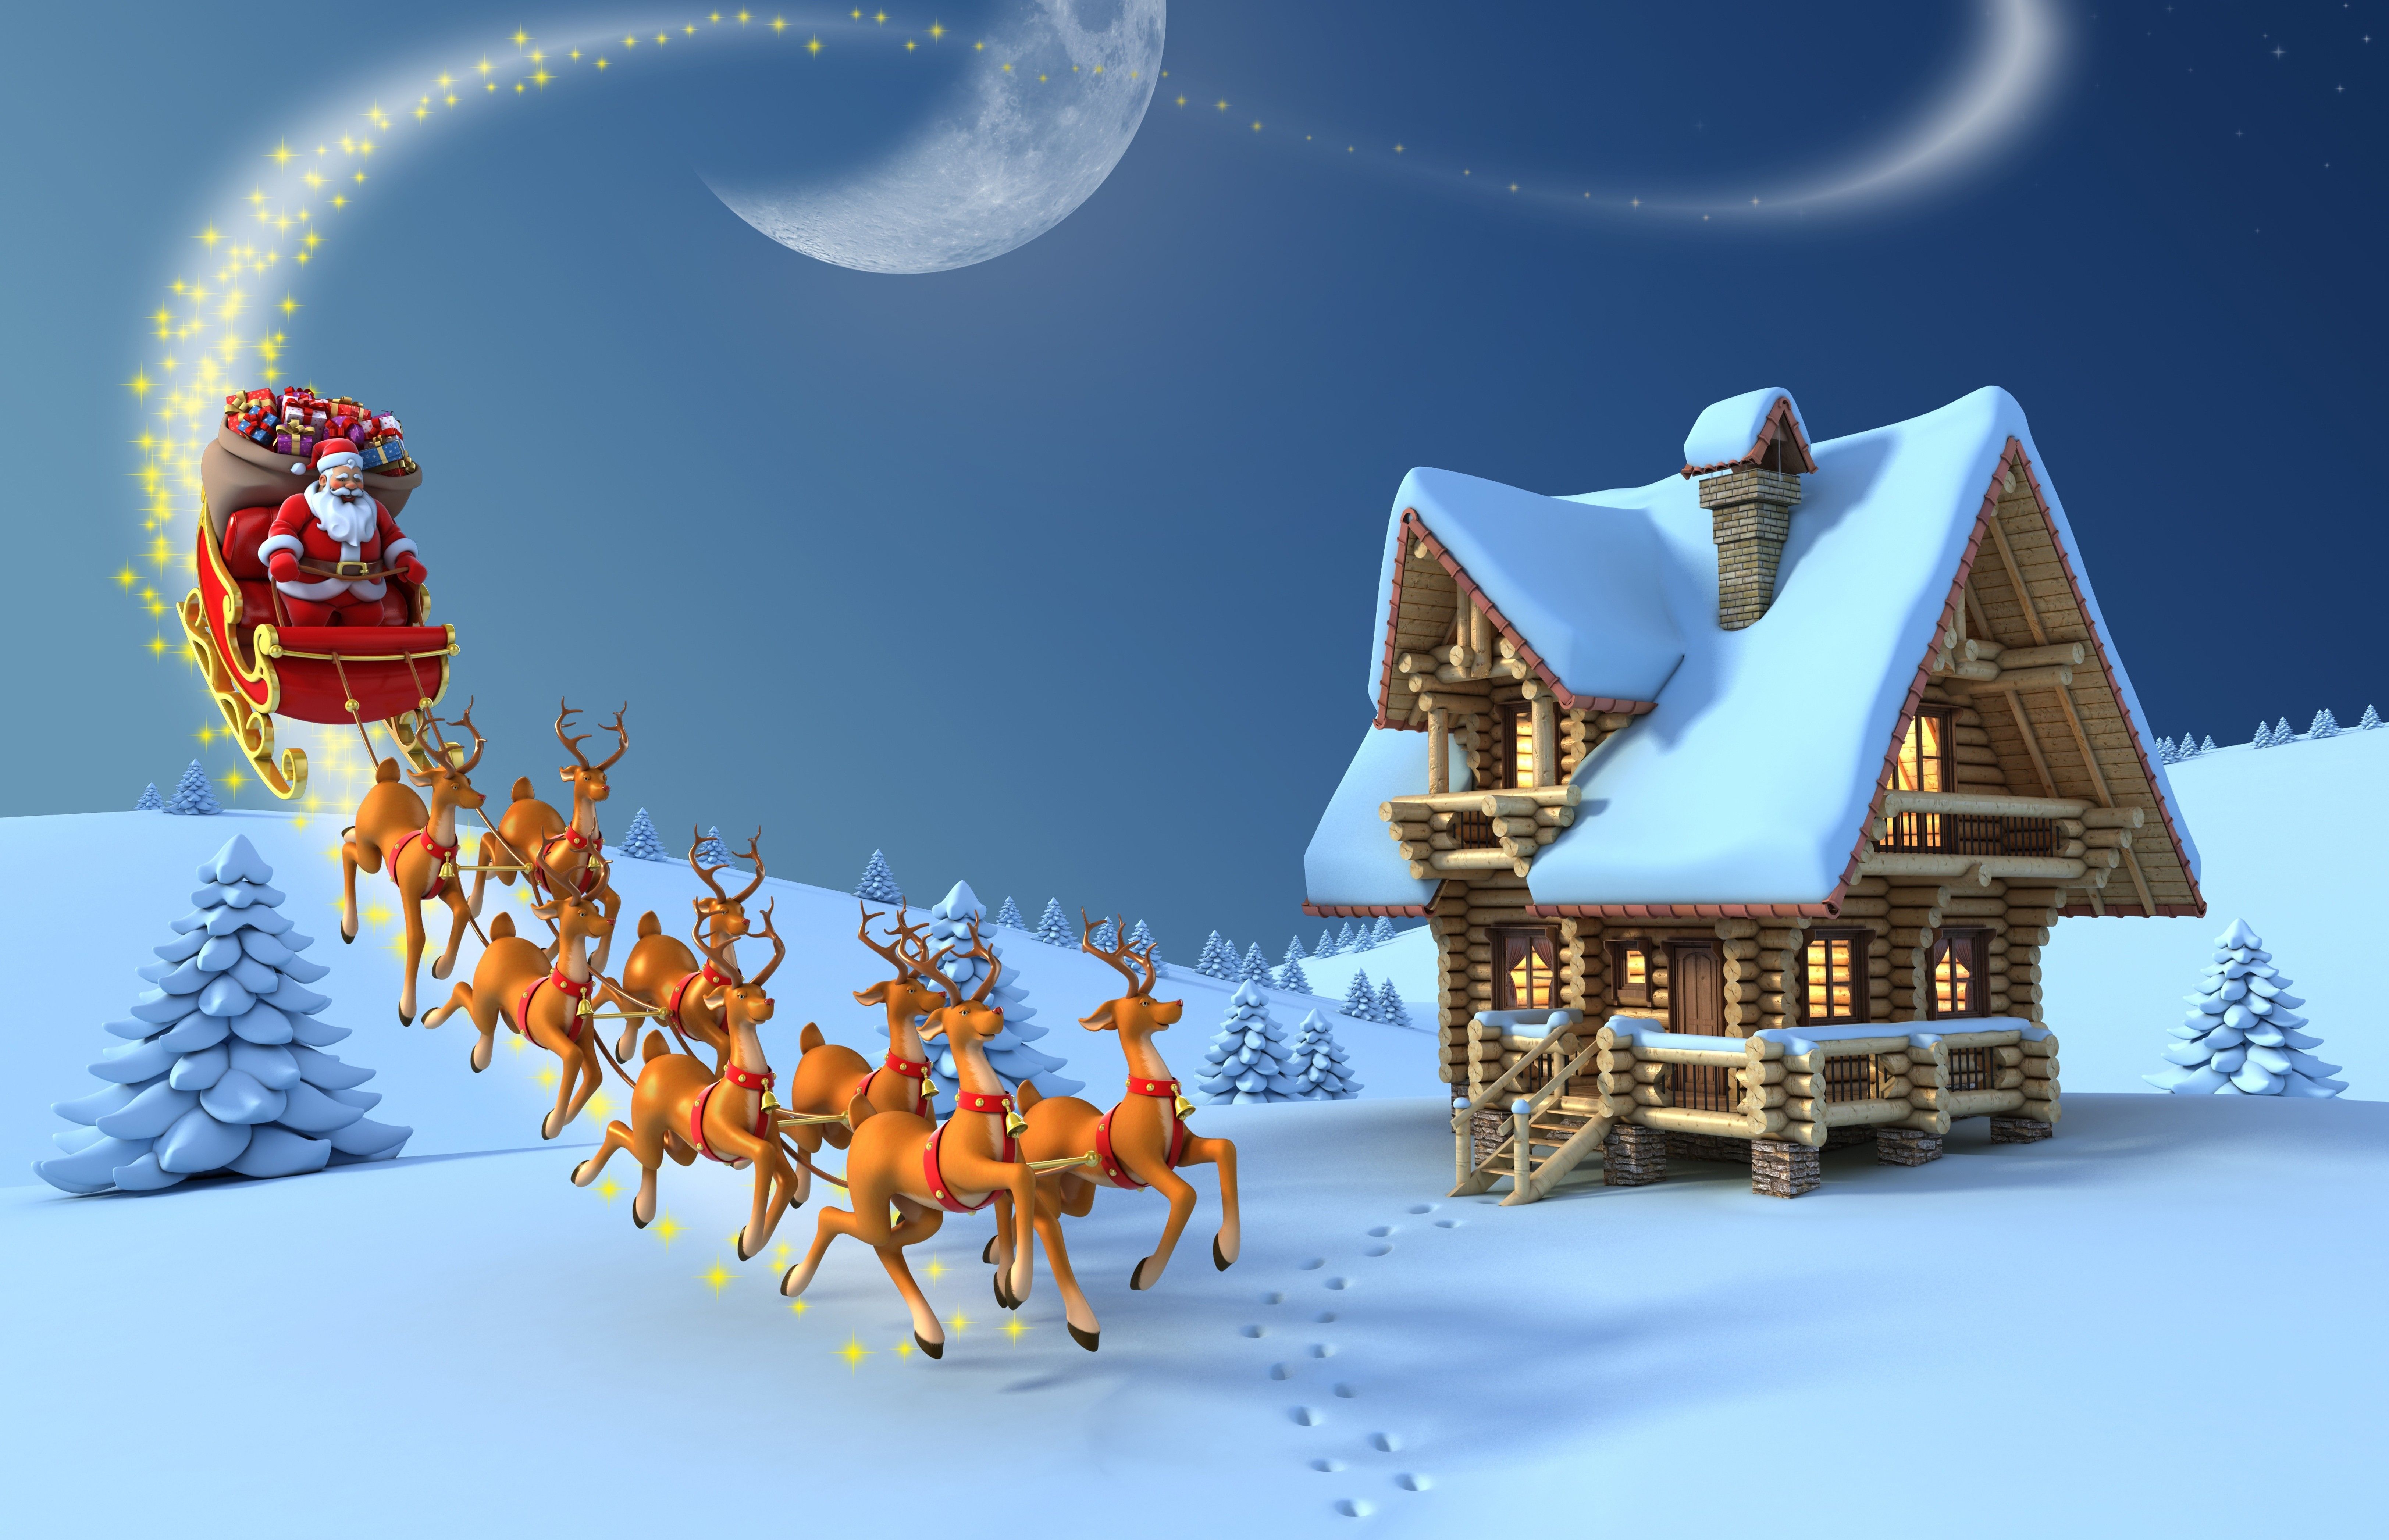 Santa Claus and his reindeers at North Pole. Happy Christmas